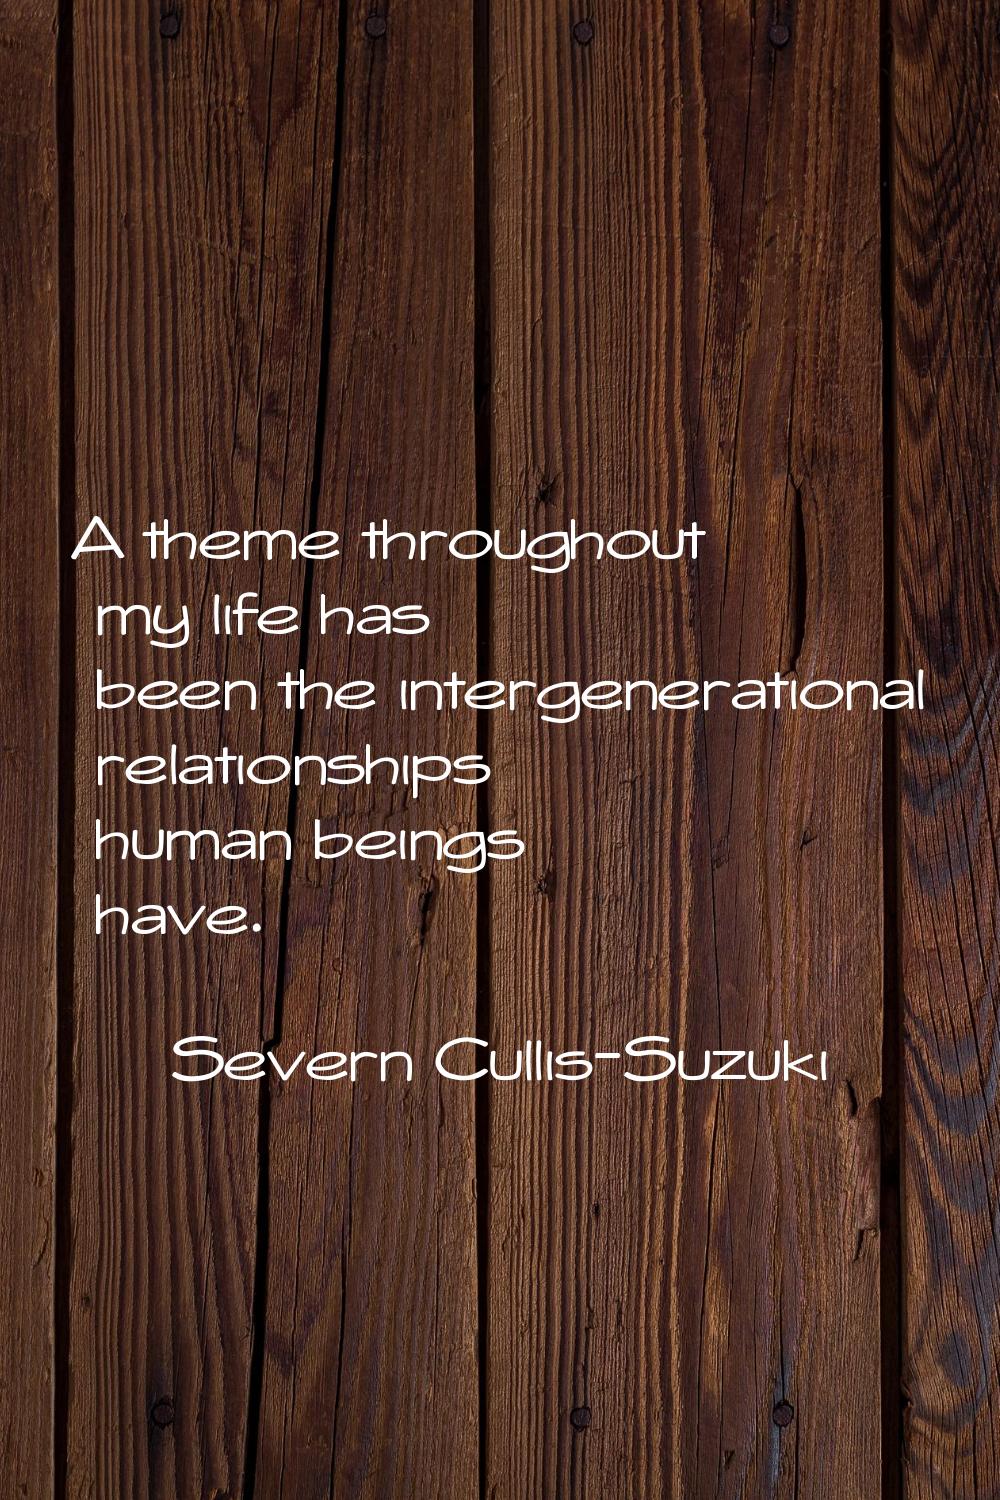 A theme throughout my life has been the intergenerational relationships human beings have.